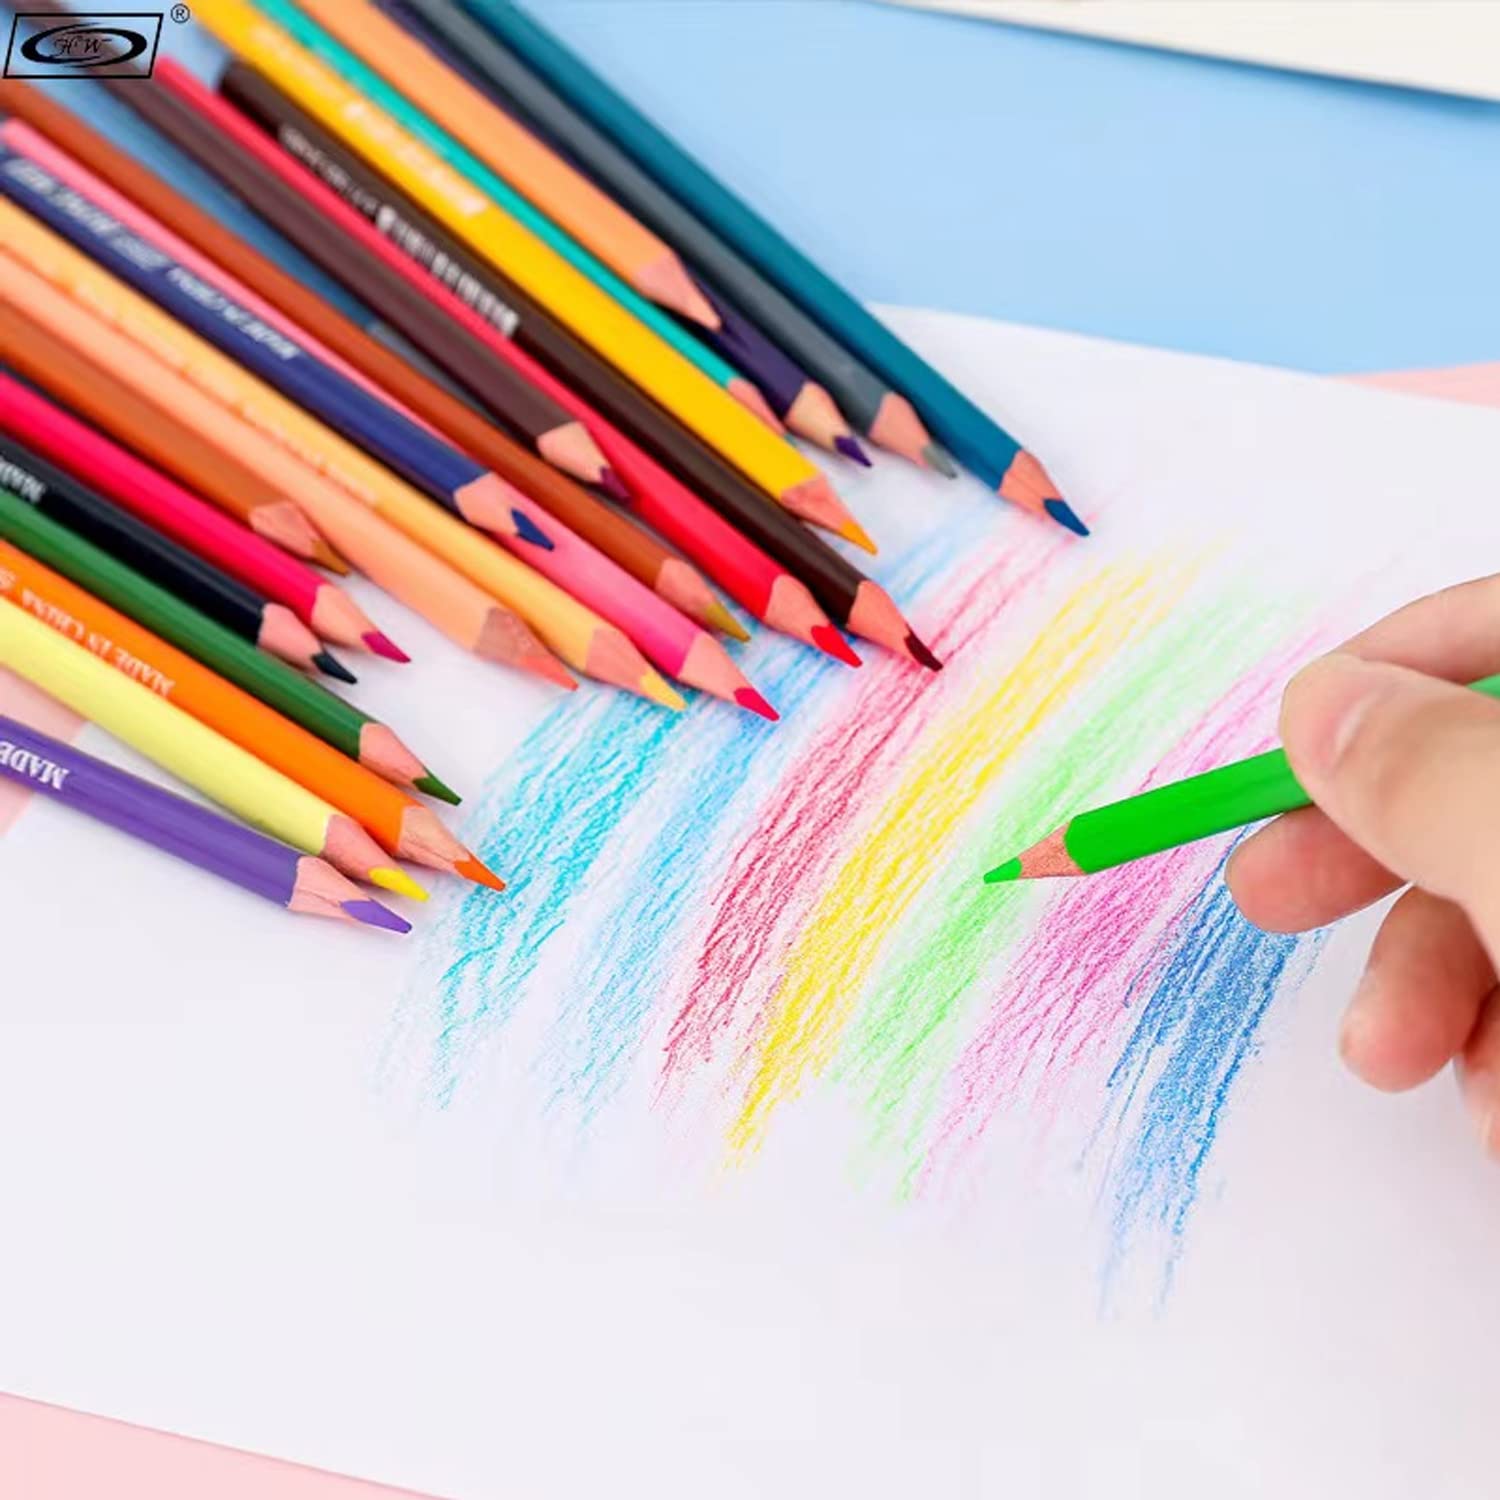 Coloring Kits for Kids, Colored Pens for Adult Coloring Books with